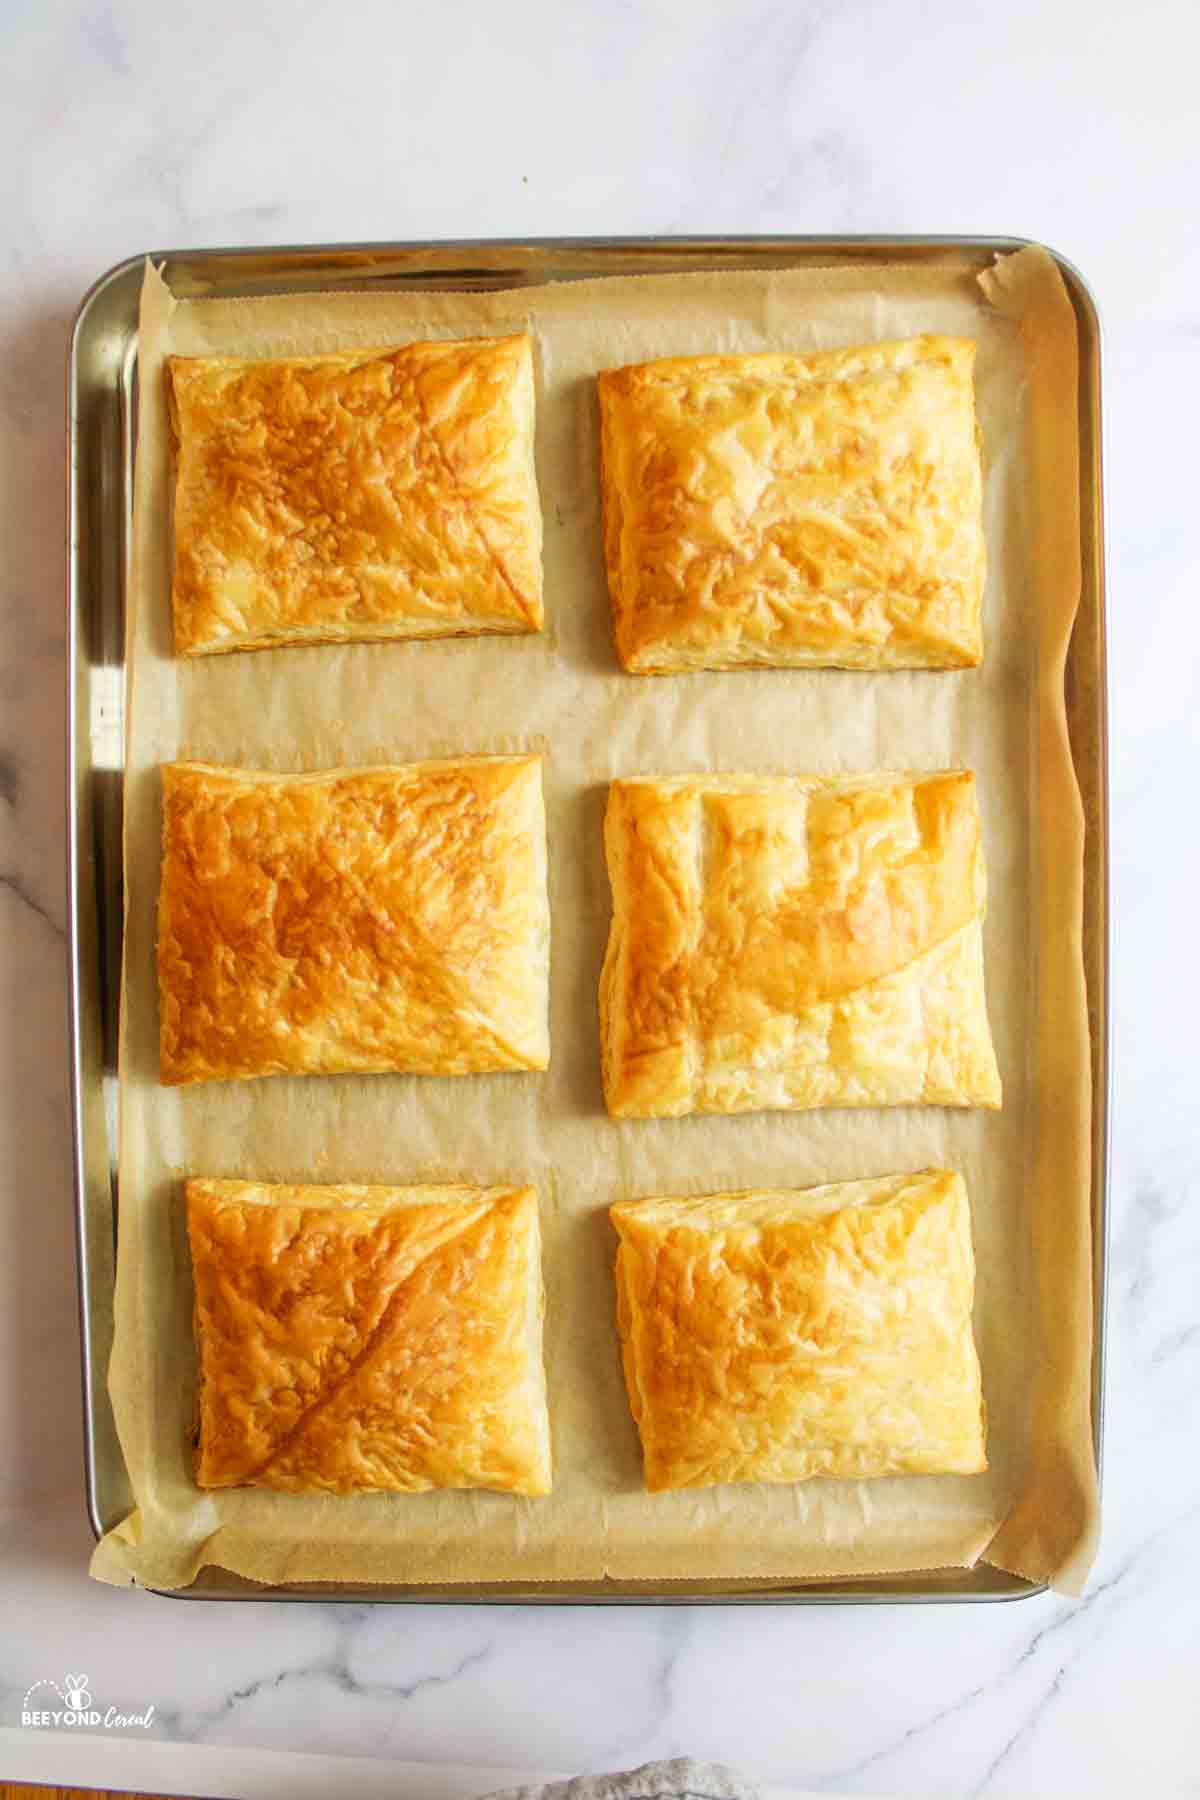 6 baked squares of puff pastry on a parchment paper lined baking sheet.